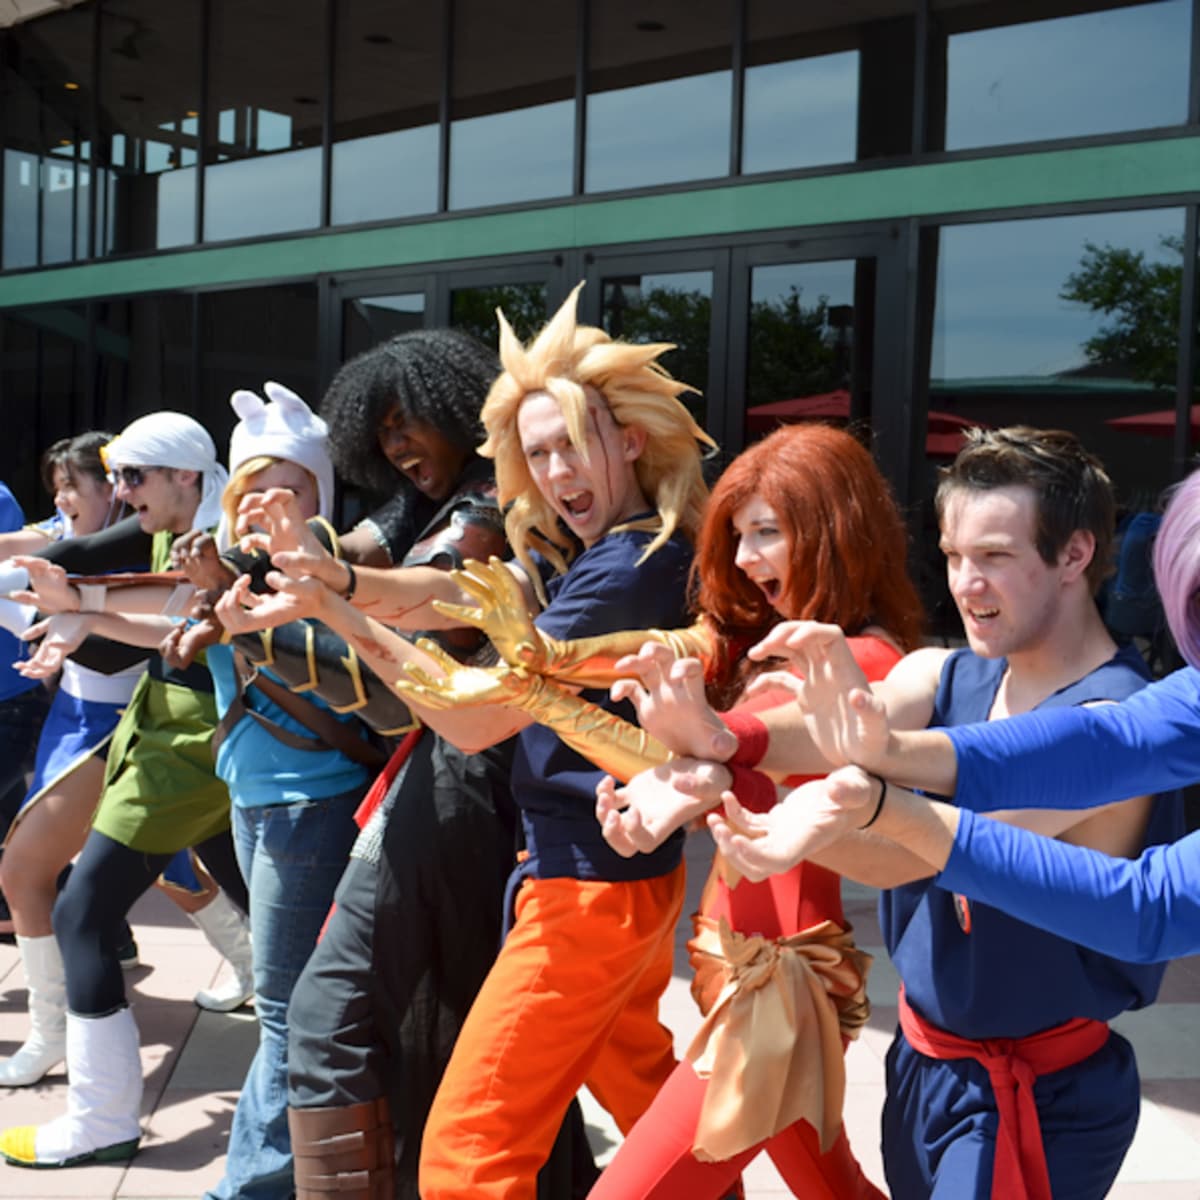 10 Things NOT To Do At Anime Conventions - HubPages